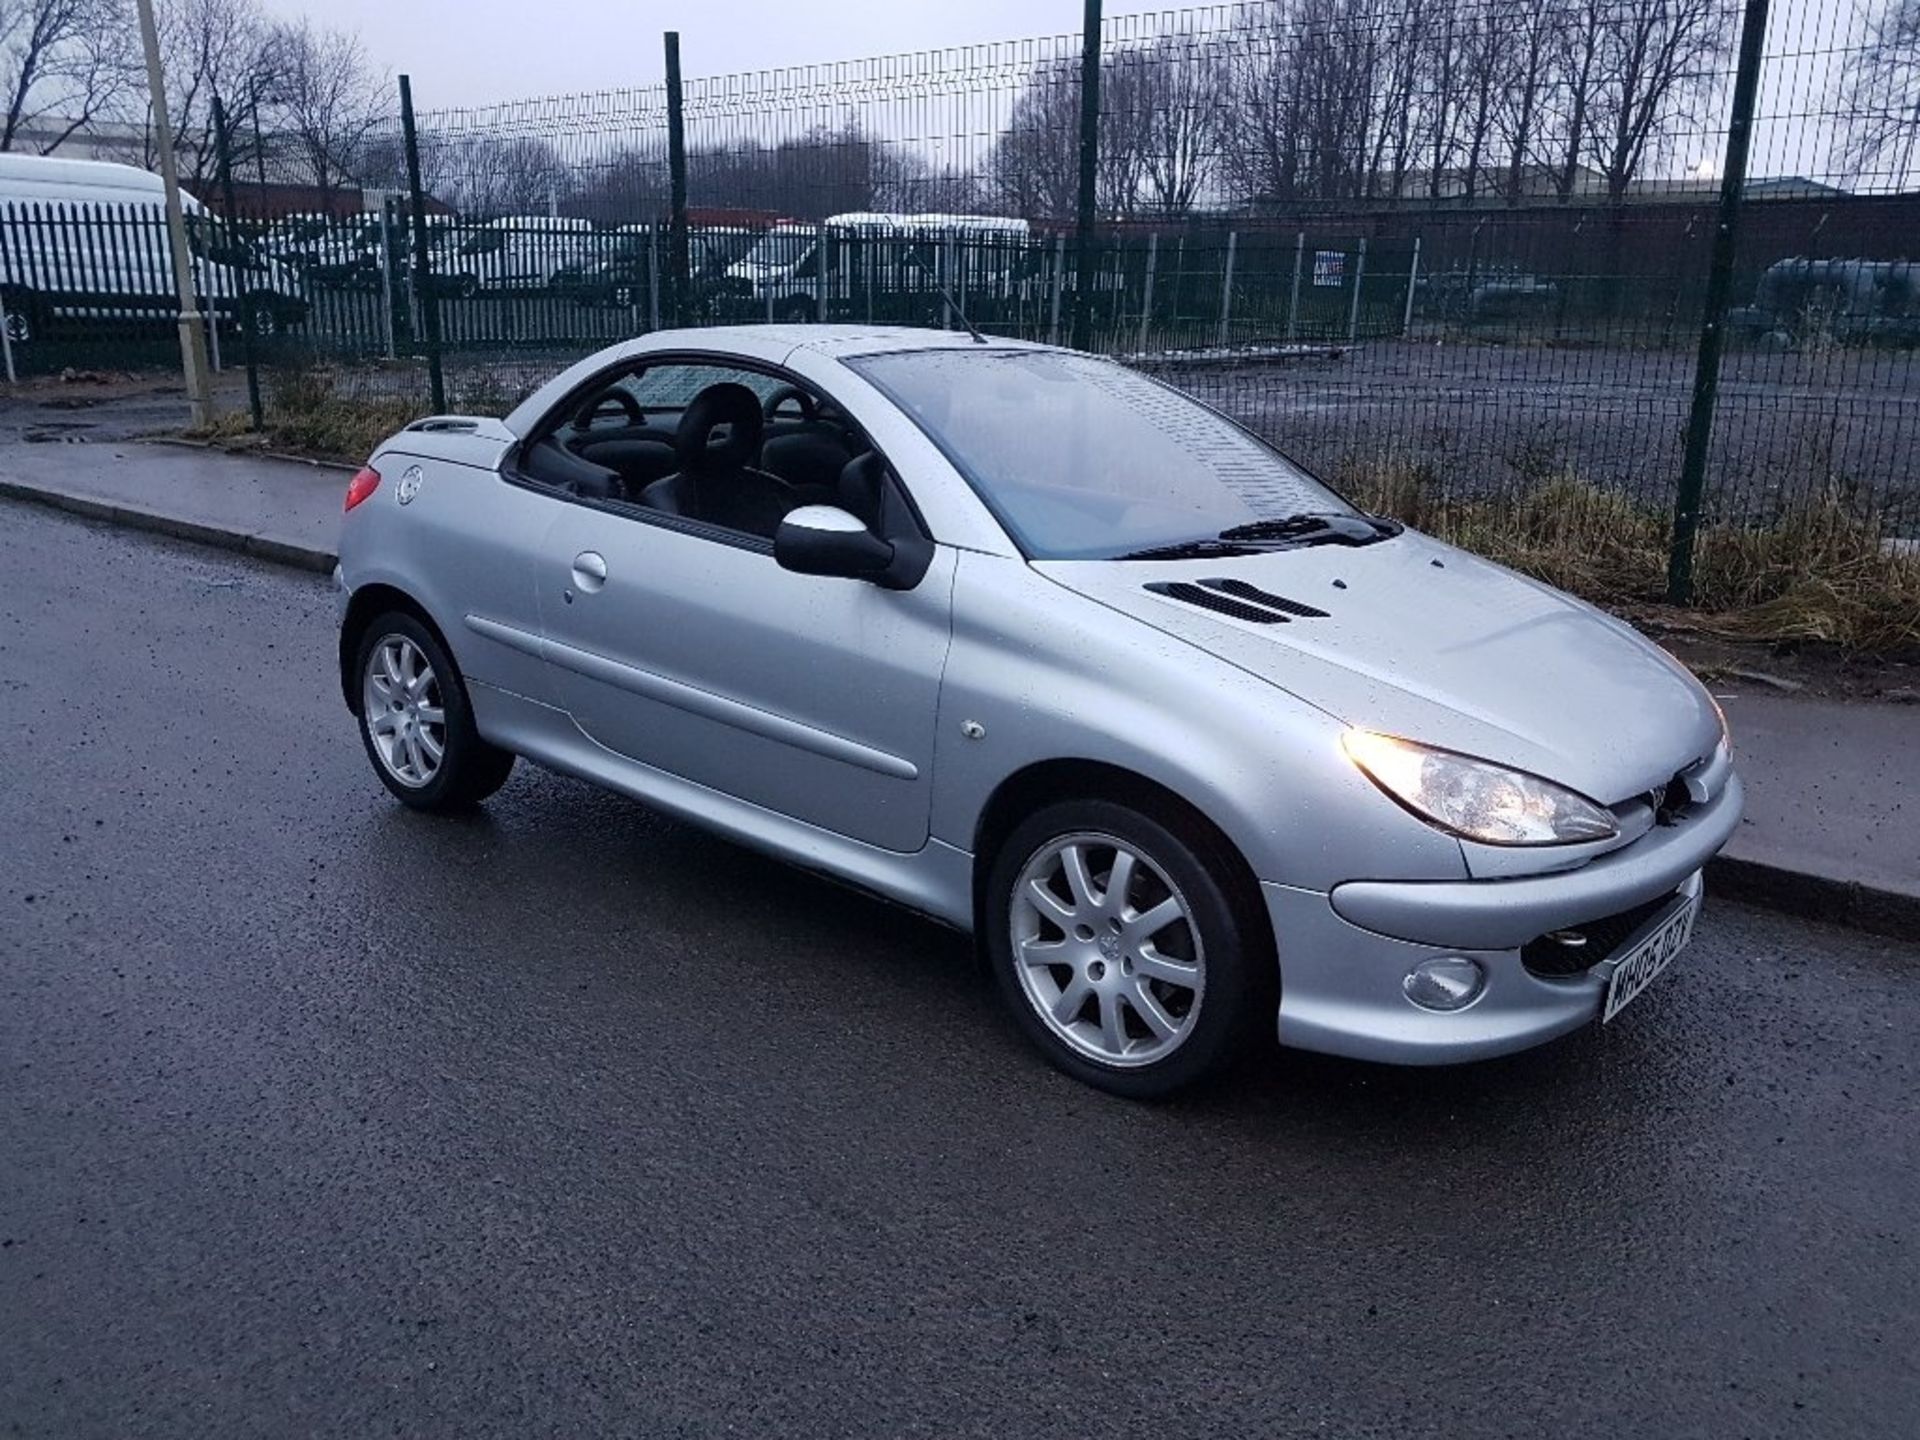 PEUGEOT, 206CC ALLURE HDI, MH05 DZV, FIRST DATE OF REGISTRATION 15/08/2005, 1.6 LITRE, DIESEL, - Image 3 of 14